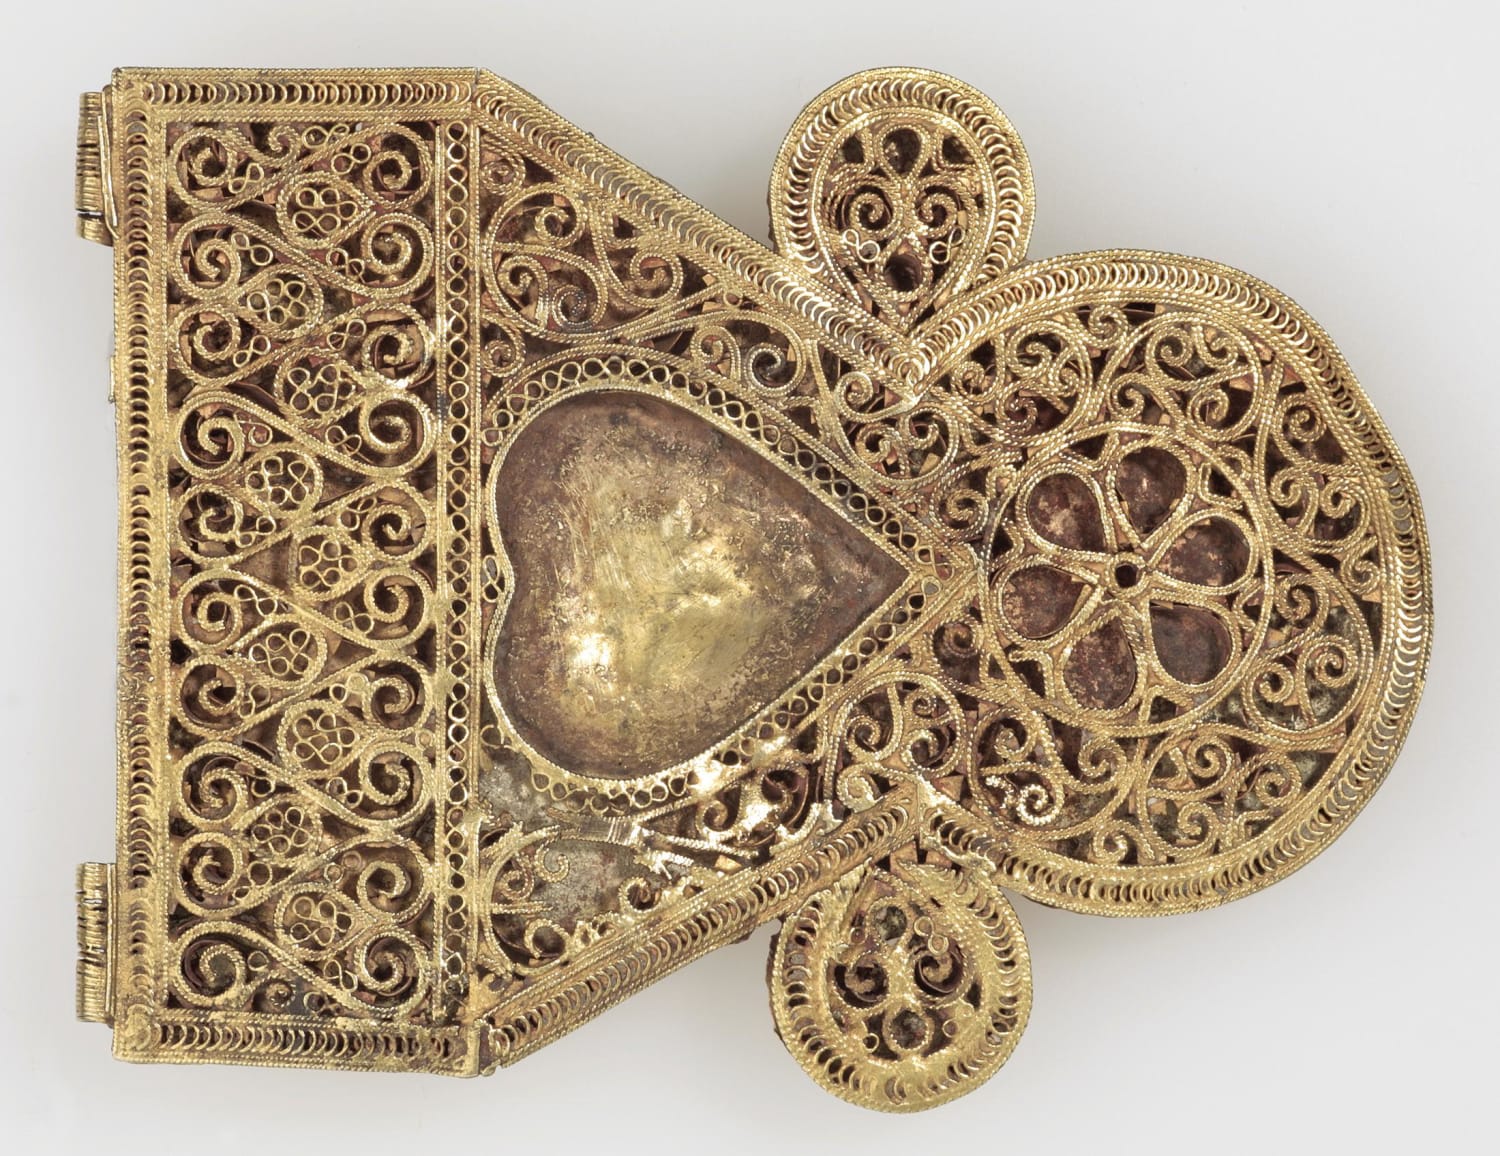 A gold belt buckle from southern Spain. 12th–early 13th century AD, now part of the Khalili Collection of Islamic Art